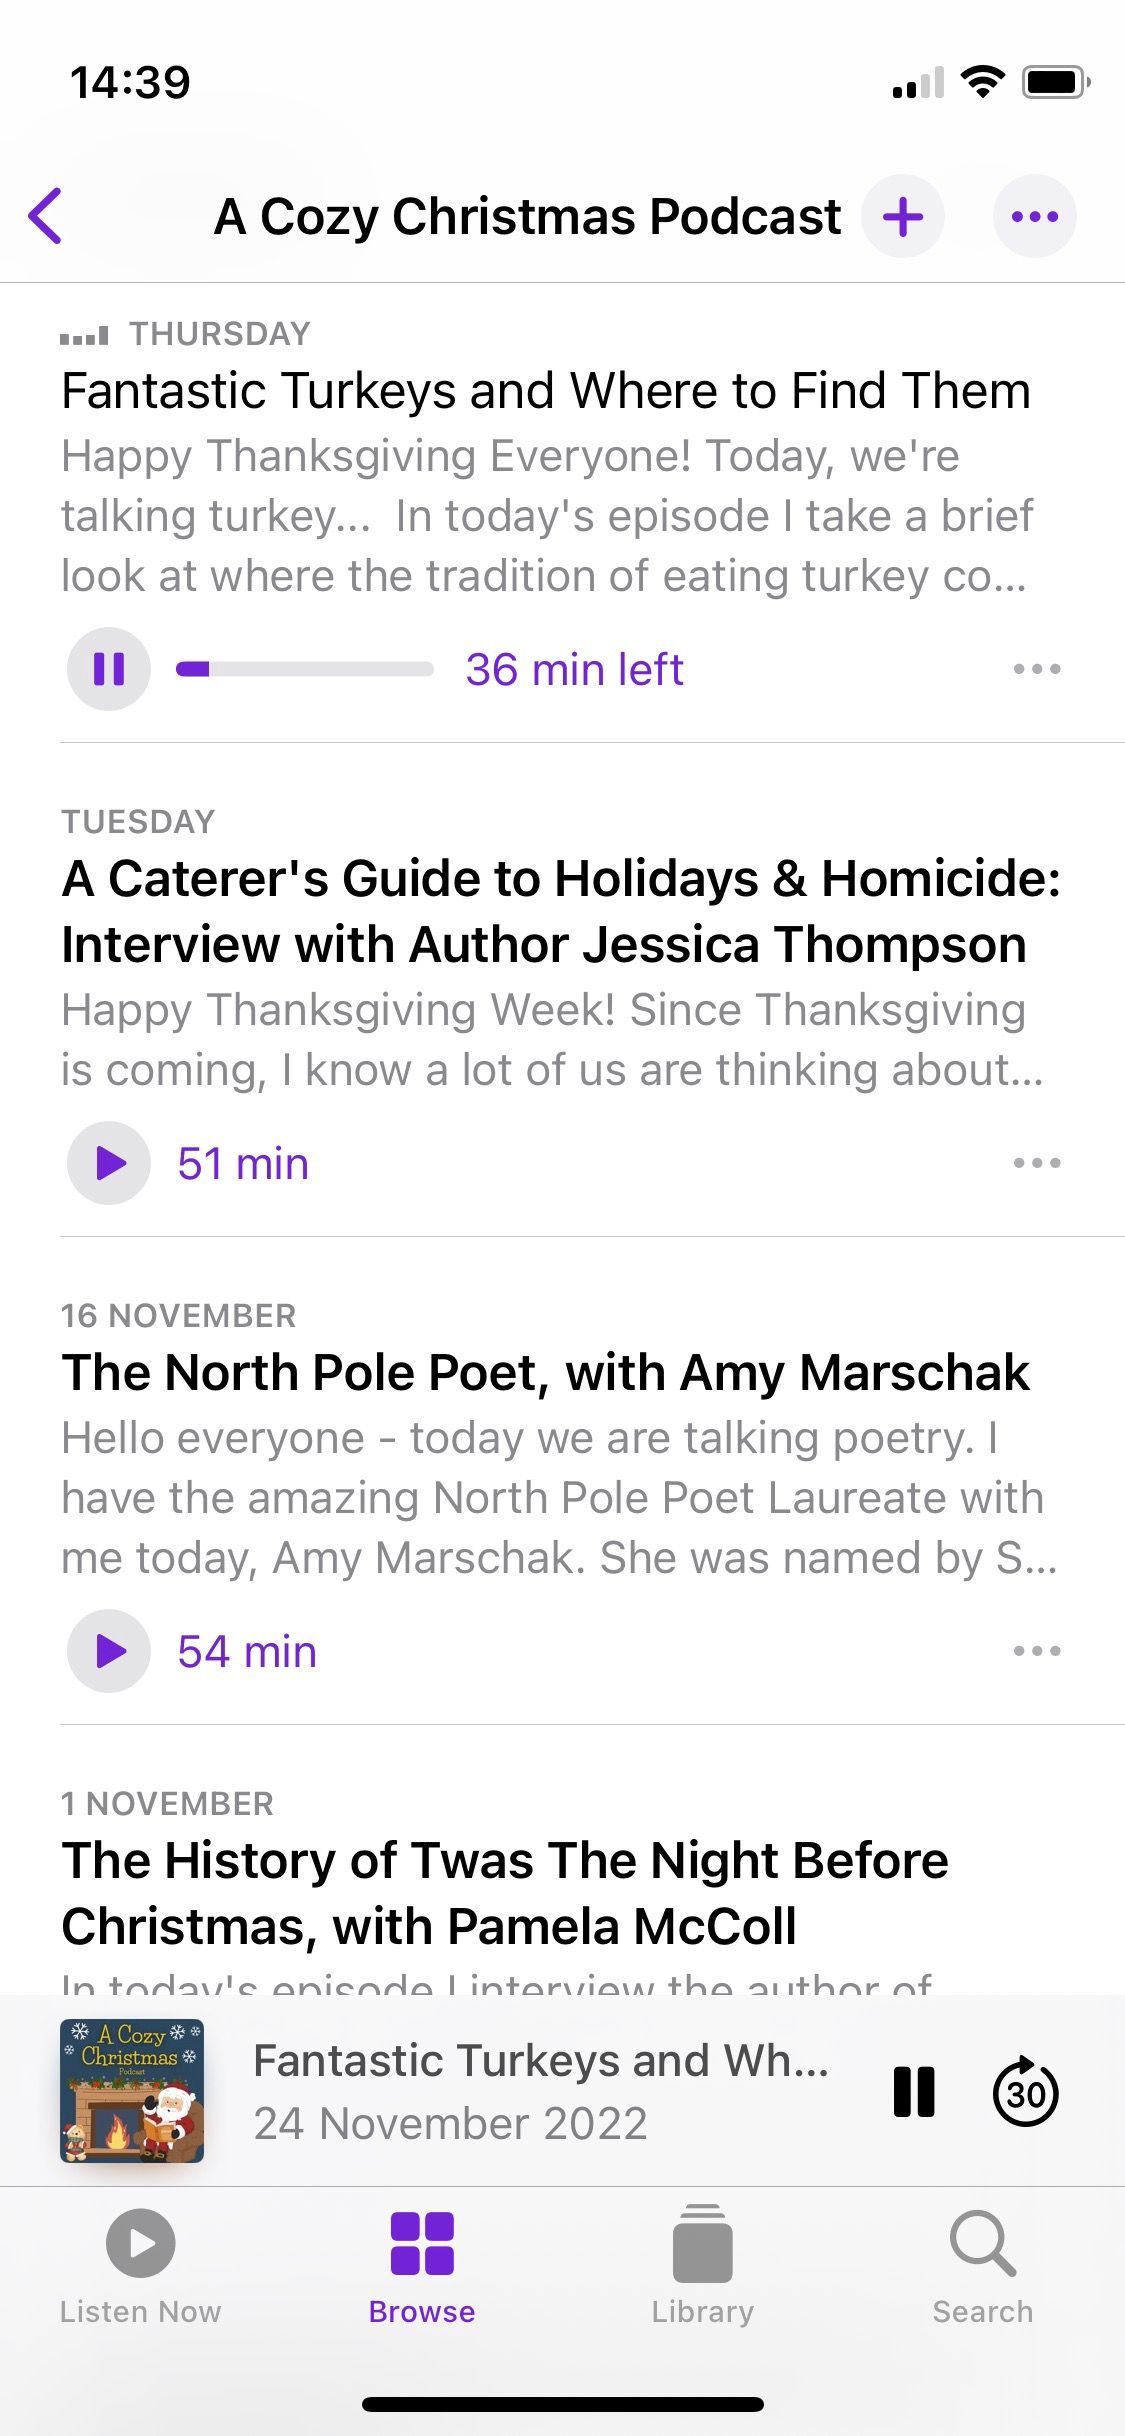 Screenshot of the A Cozy Christmas podcast showing the list of episodes